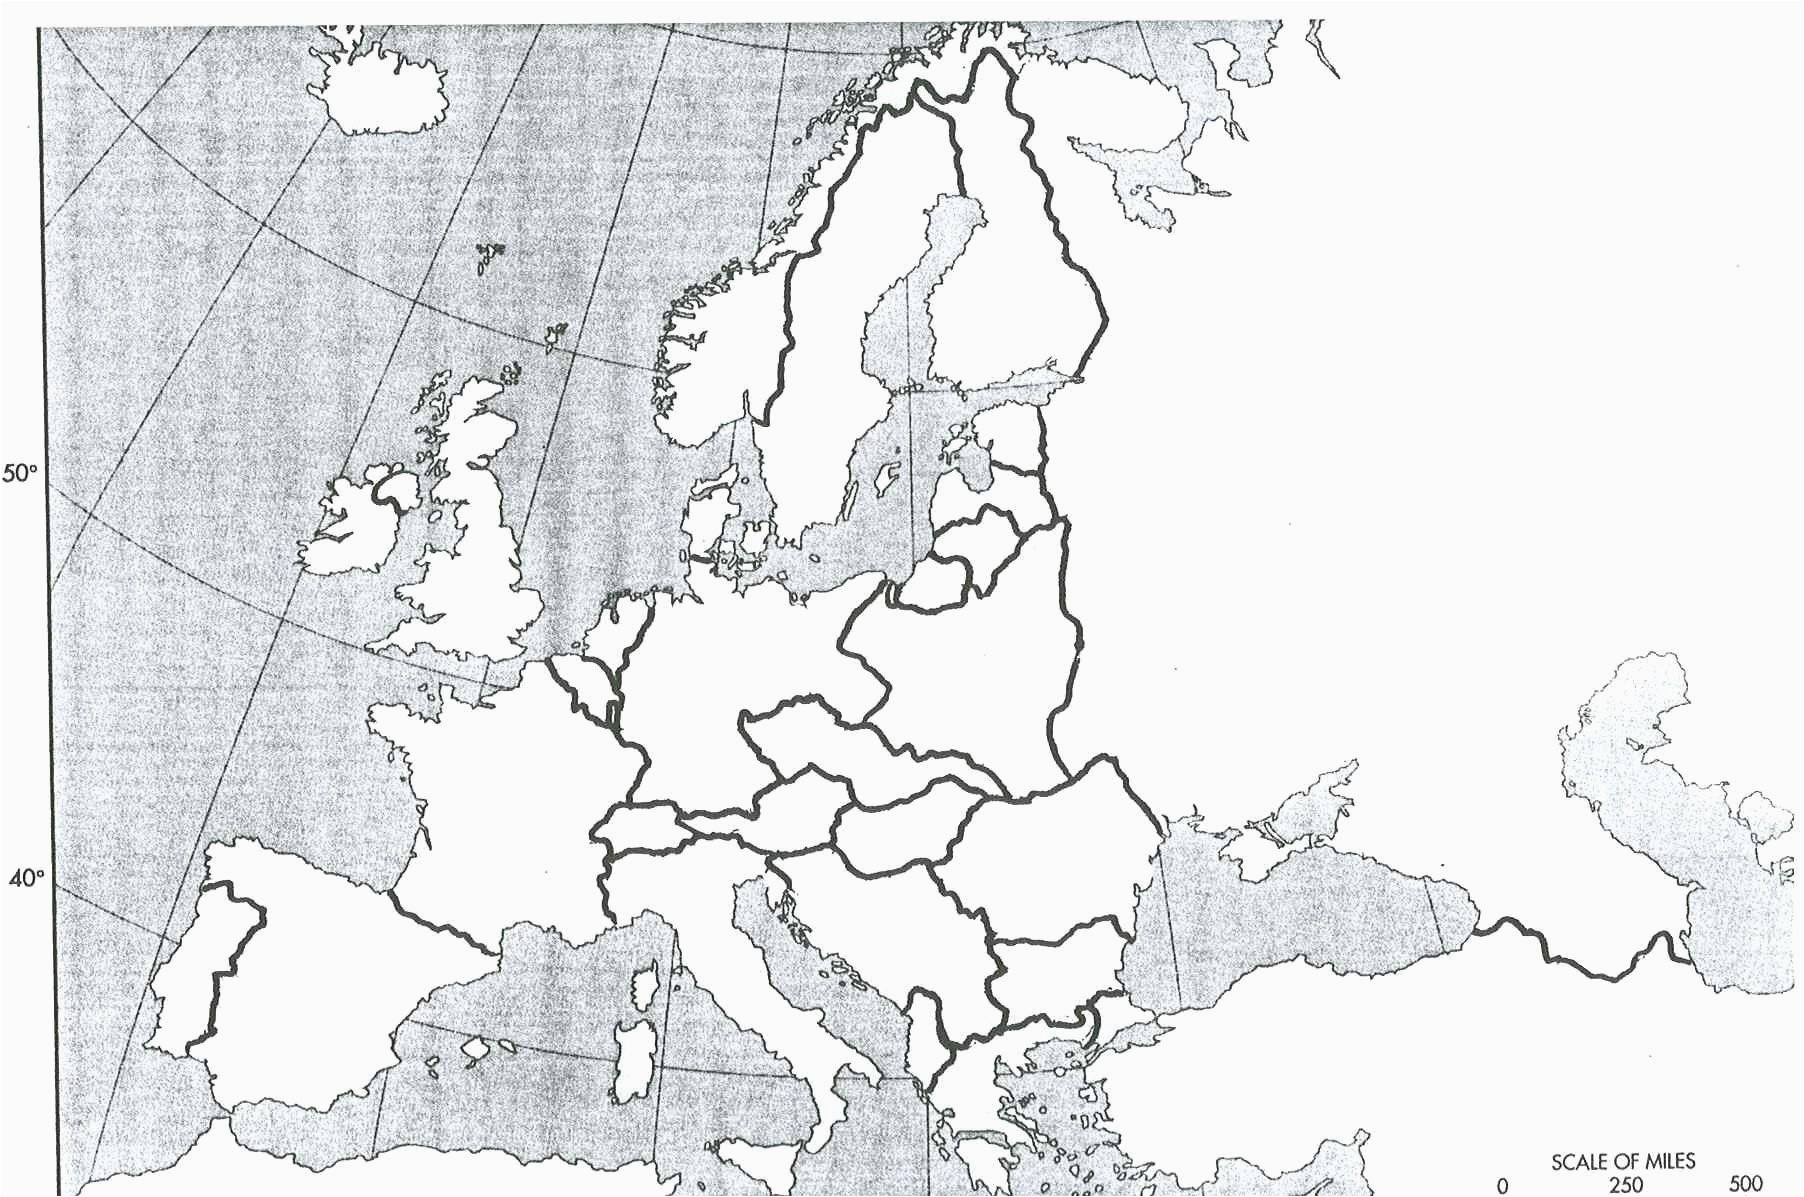 Description for Maps the World Black and White Free Downloads Europe In World War asia Europe Map Maps the World Black and White Free Downloads Europe In